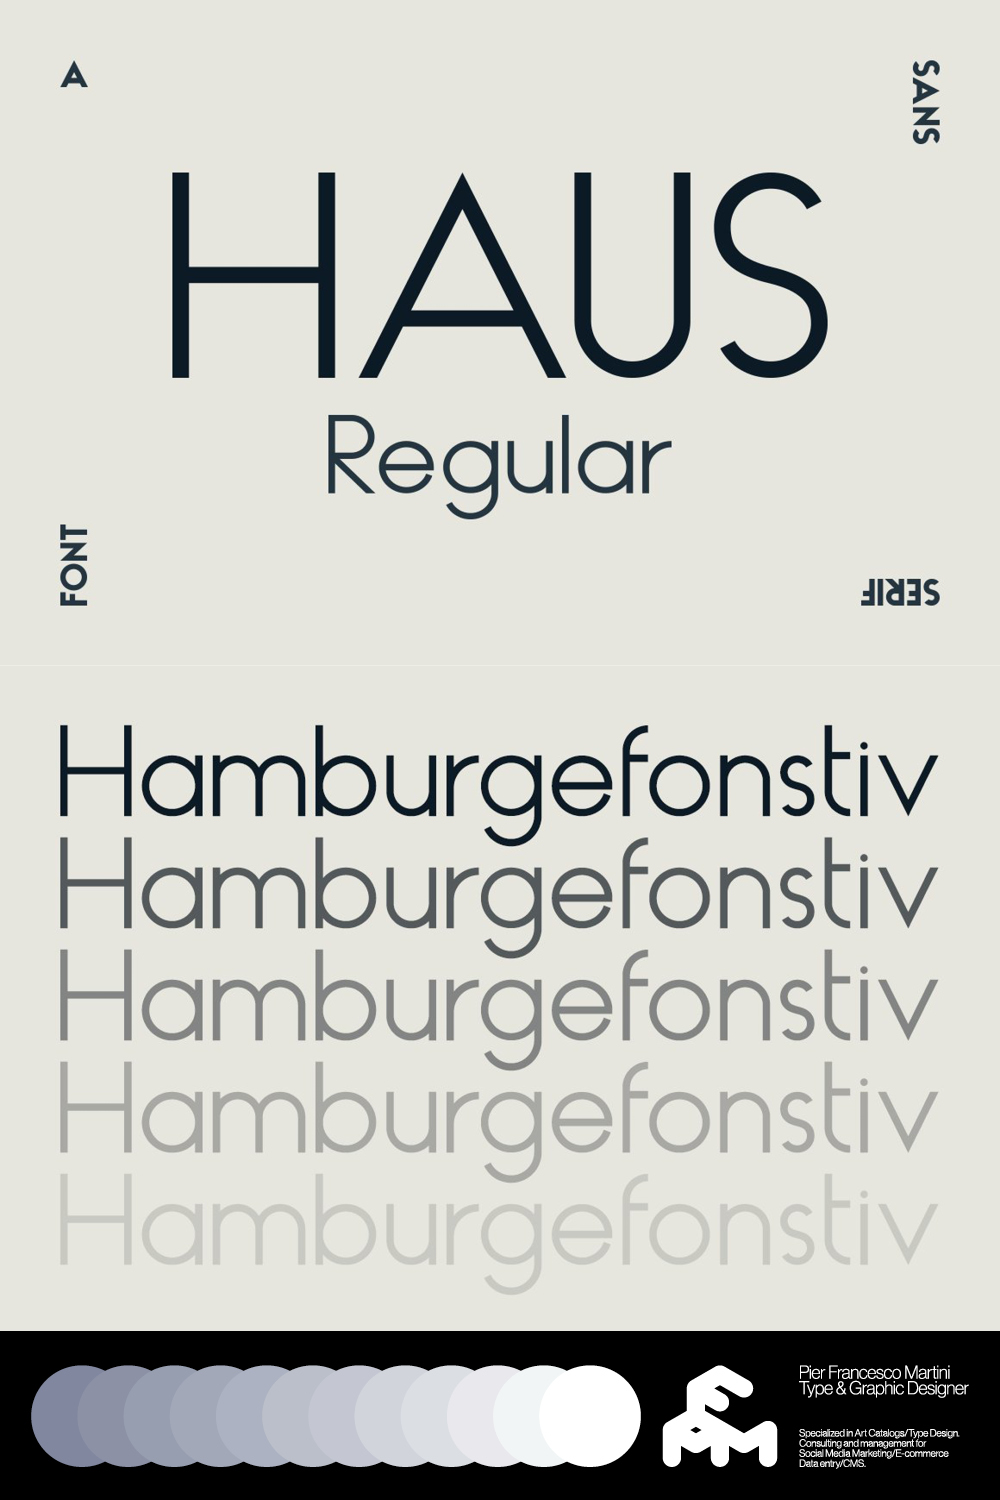 Examples of a font with clear letters of different sizes on a beige background.